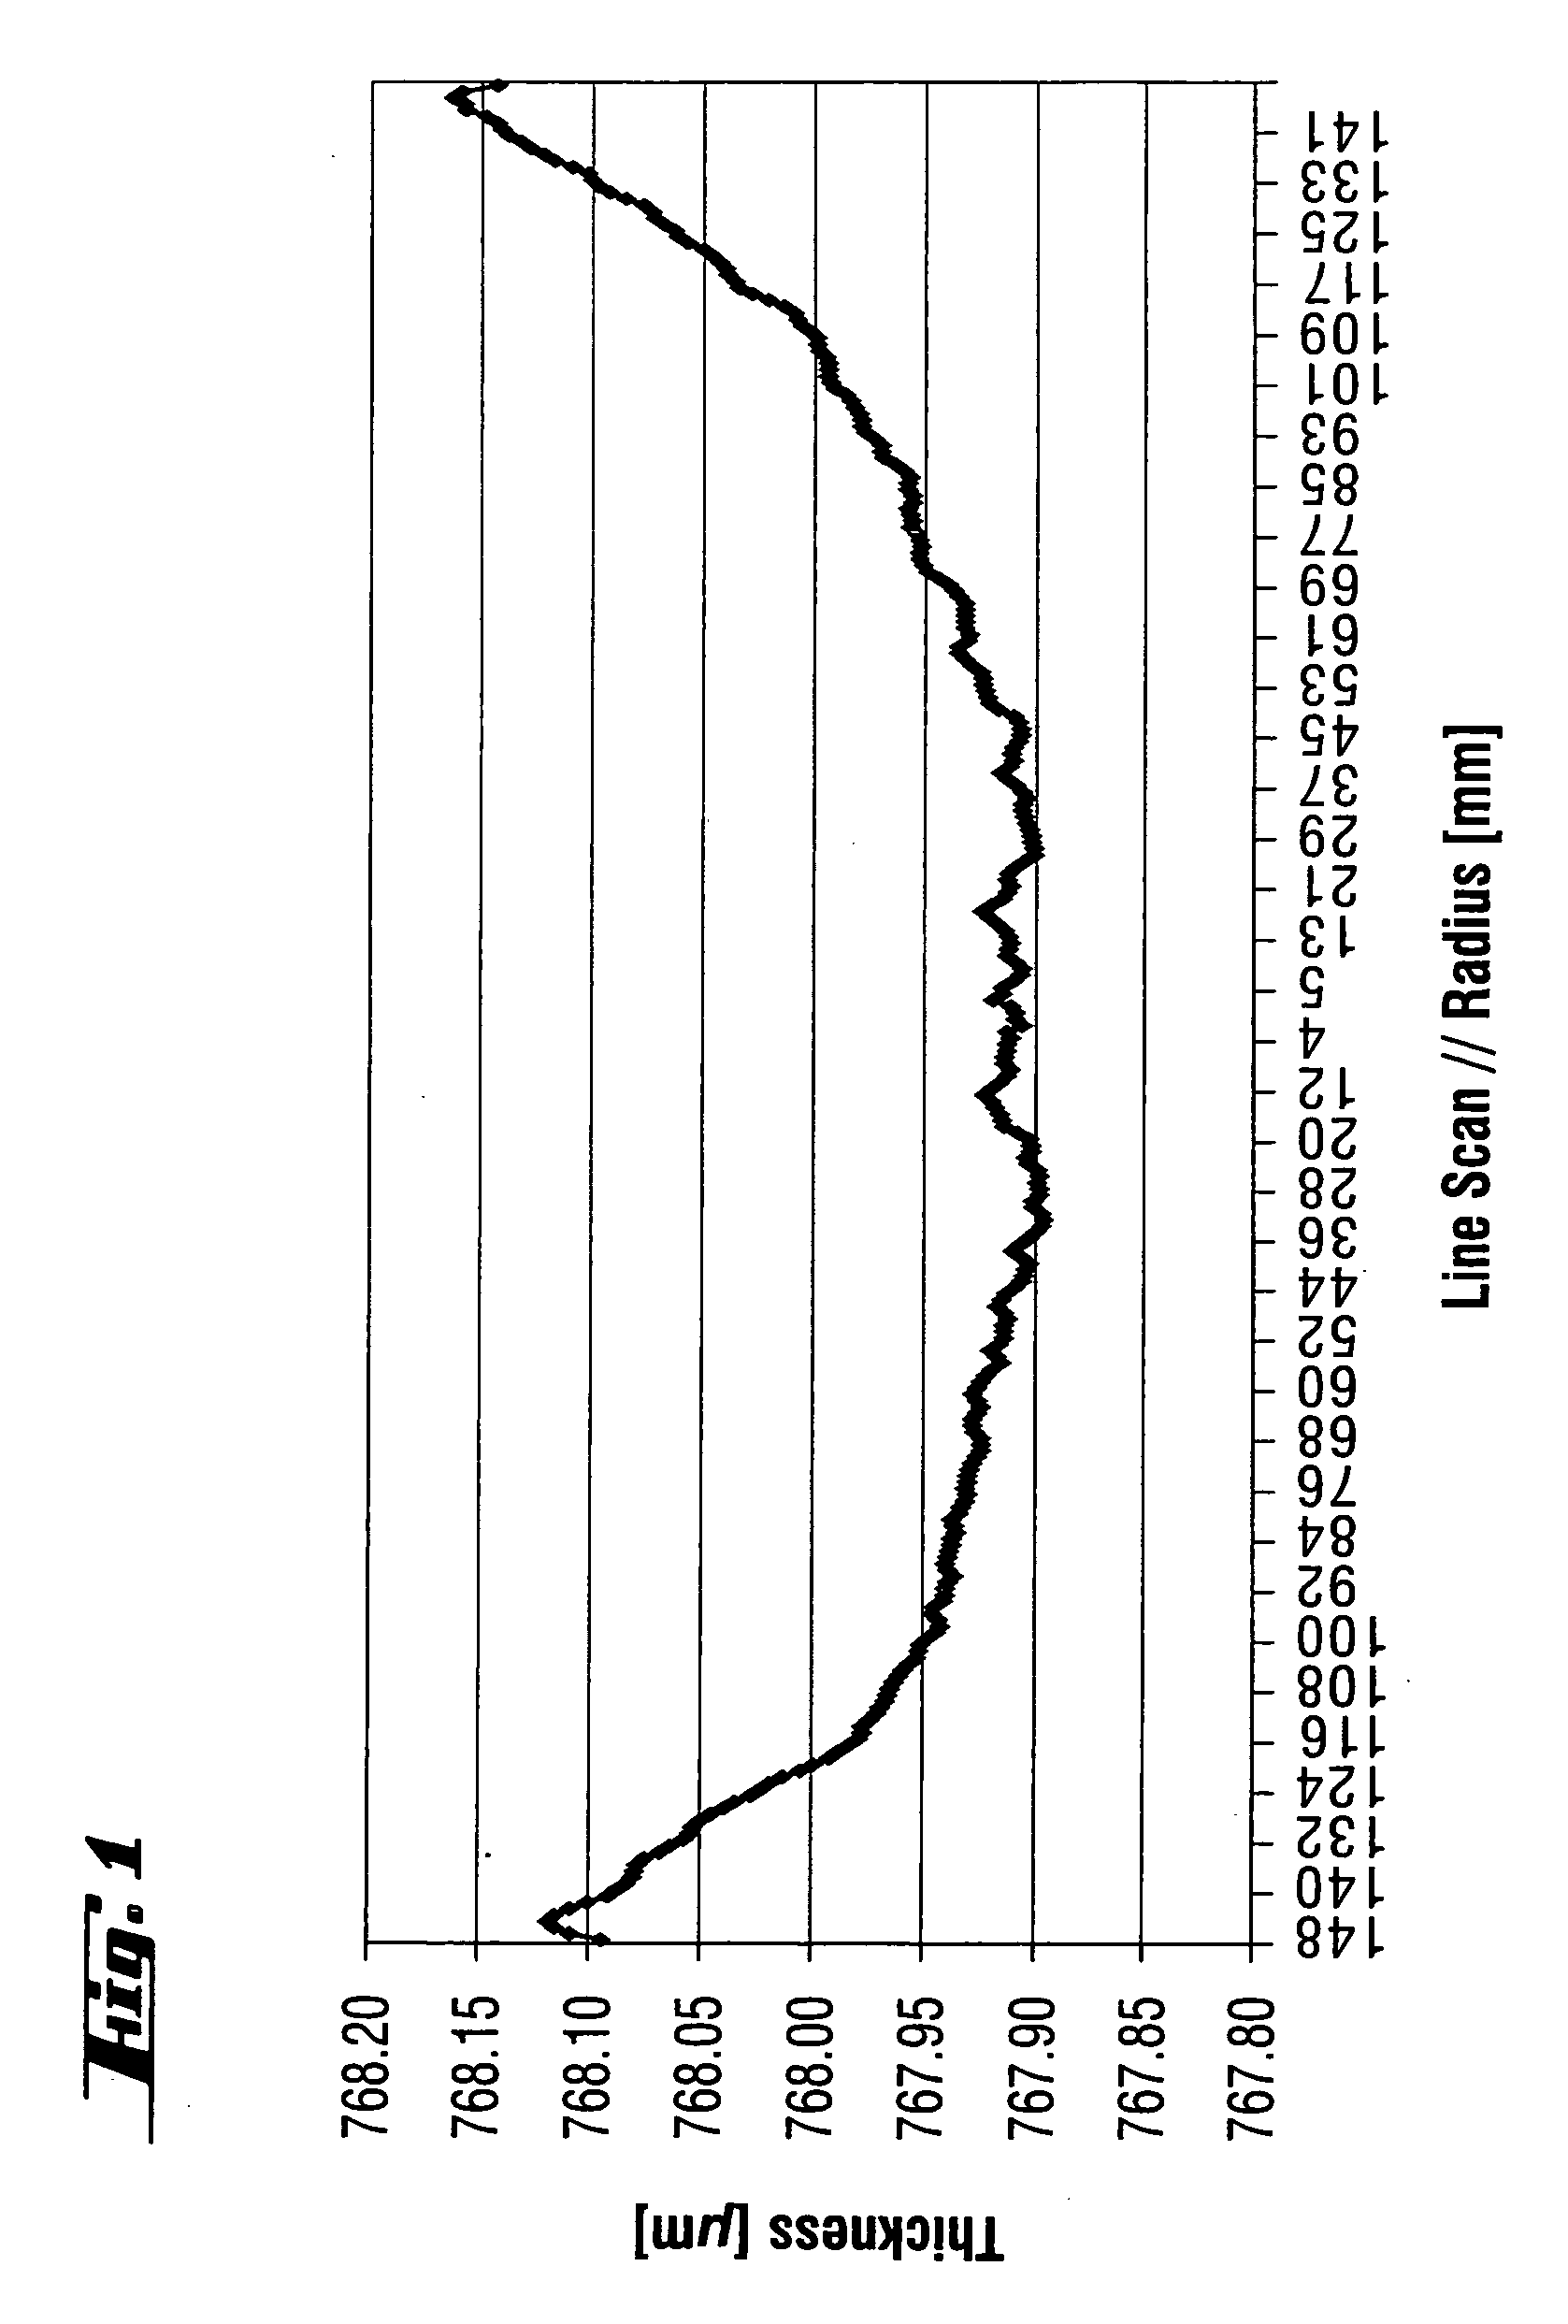 Epitaxially coated silicon wafer and method for producing epitaxially coated silicon wafers